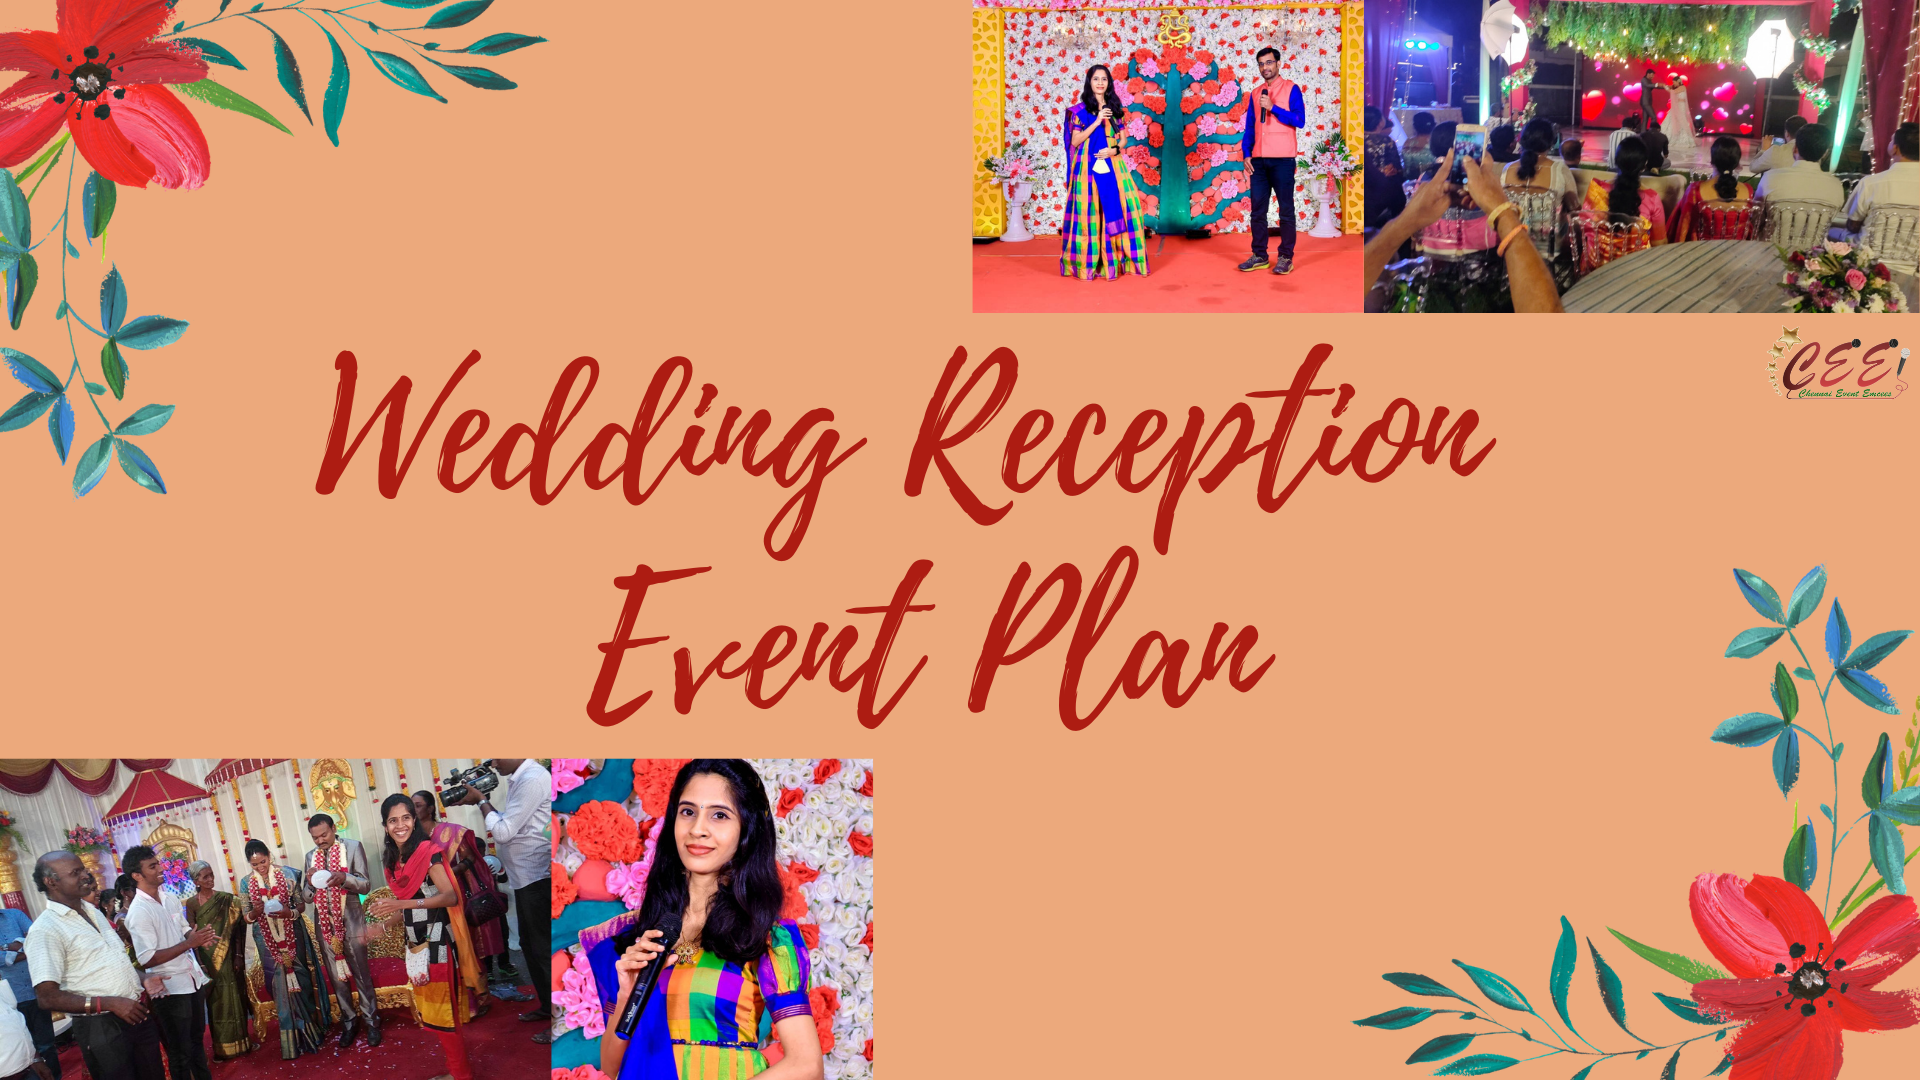 Event Plan for Wedding Reception Event